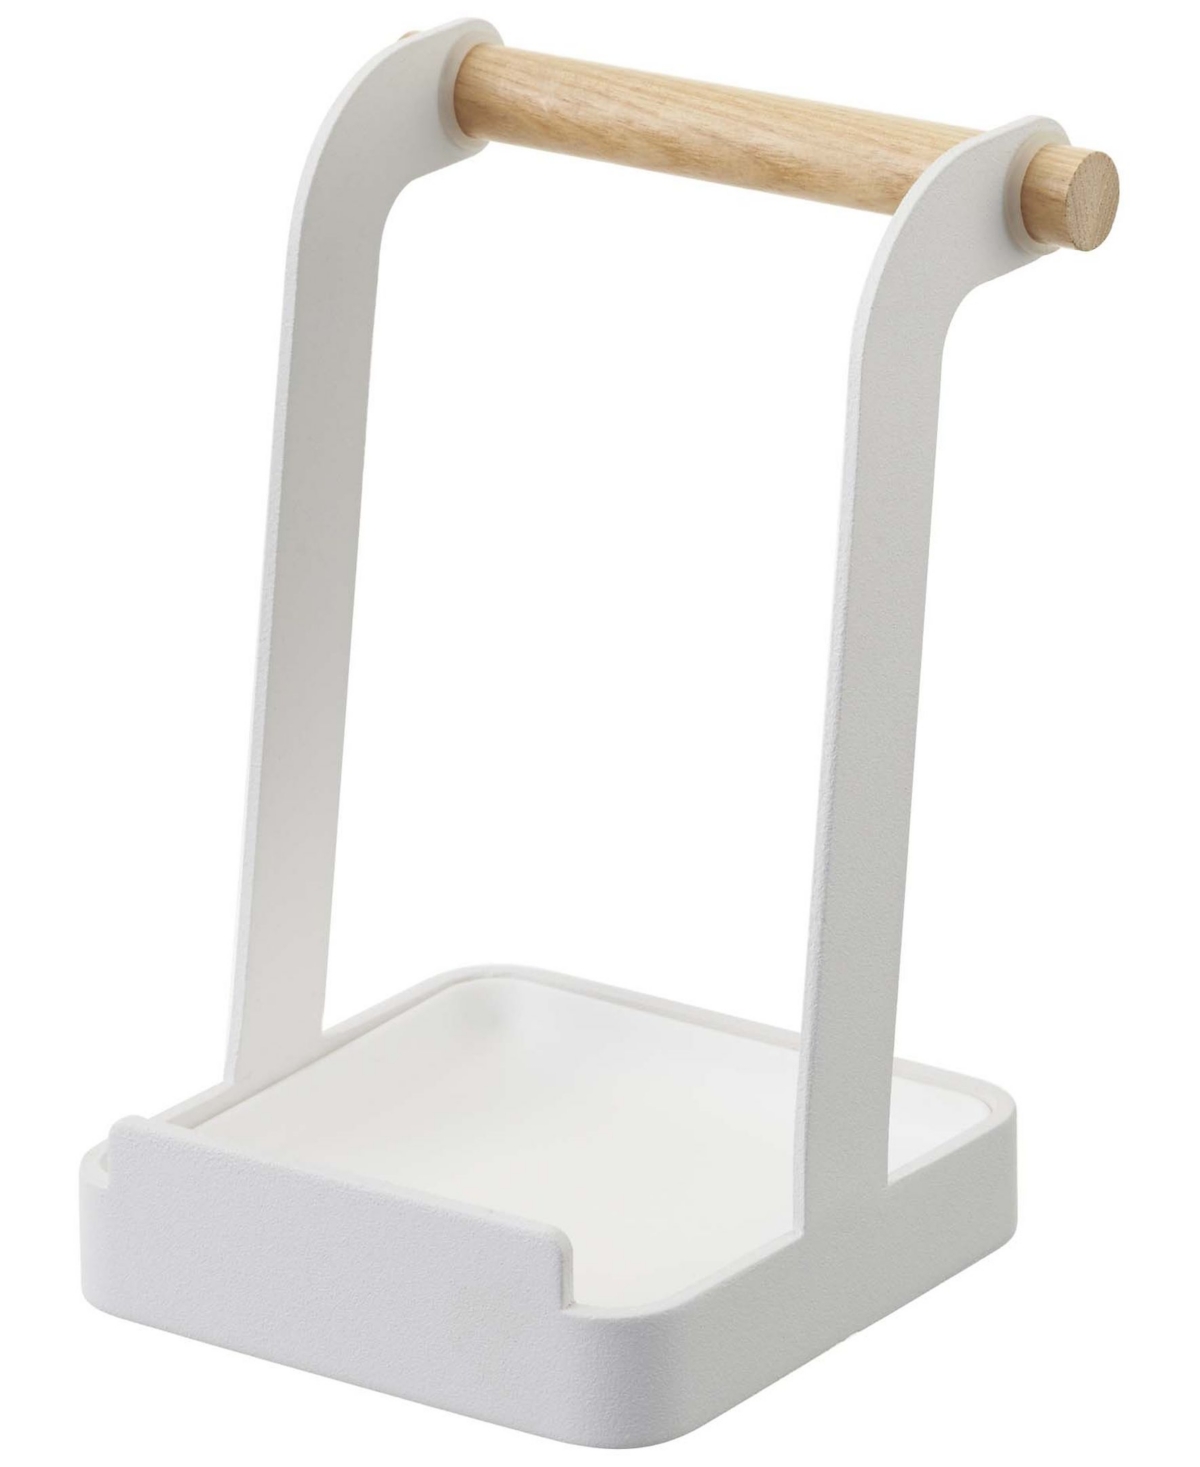 Home Tosca Ladle Lid Stand - White